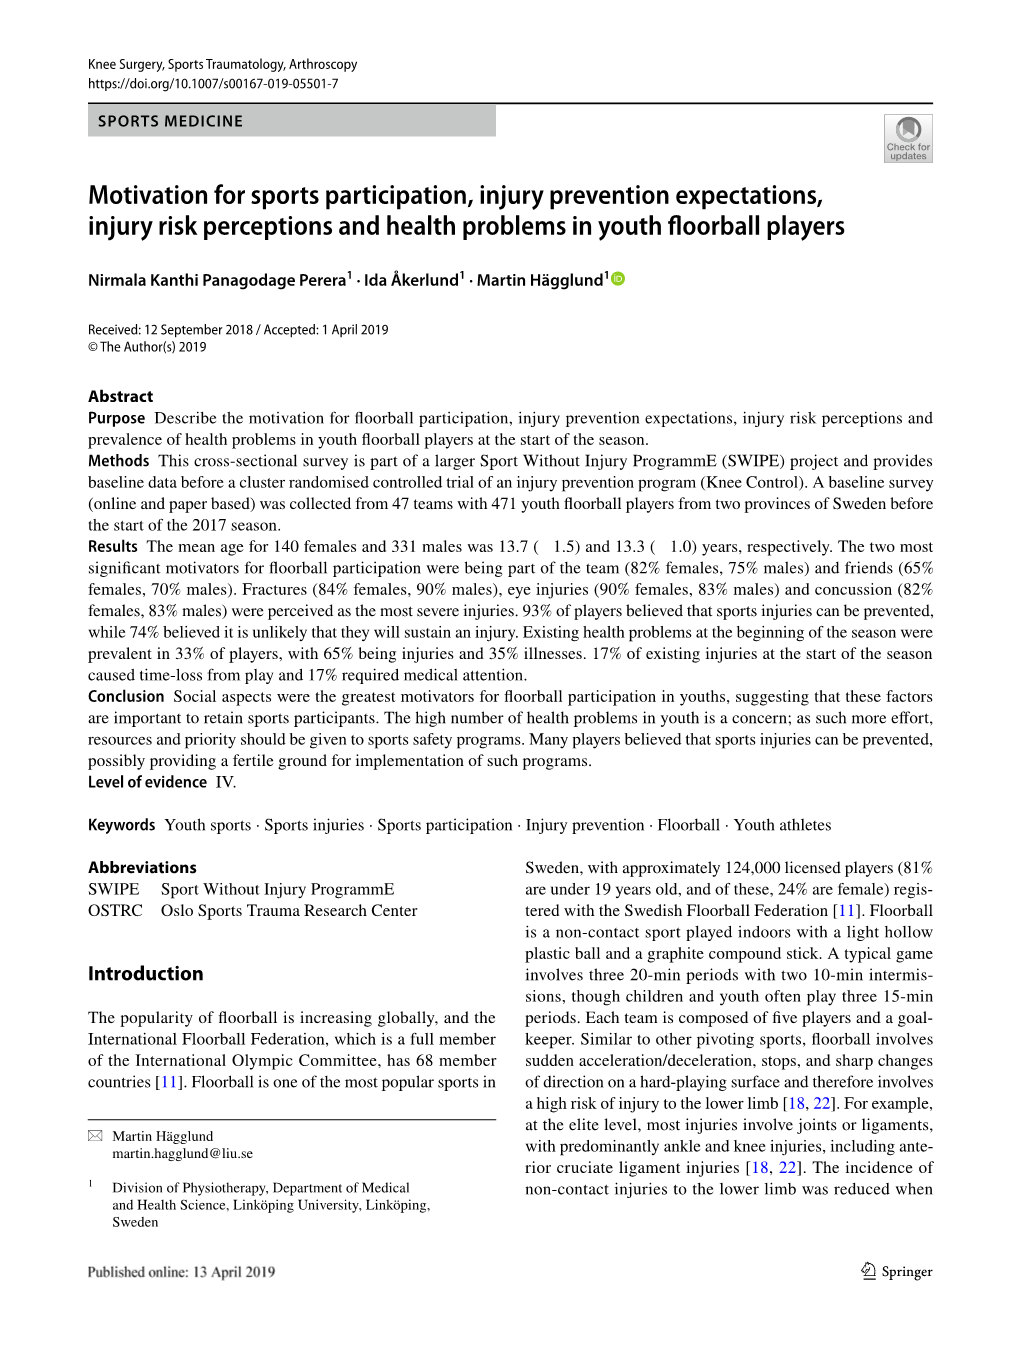 Motivation for Sports Participation, Injury Prevention Expectations, Injury Risk Perceptions and Health Problems in Youth Foorball Players